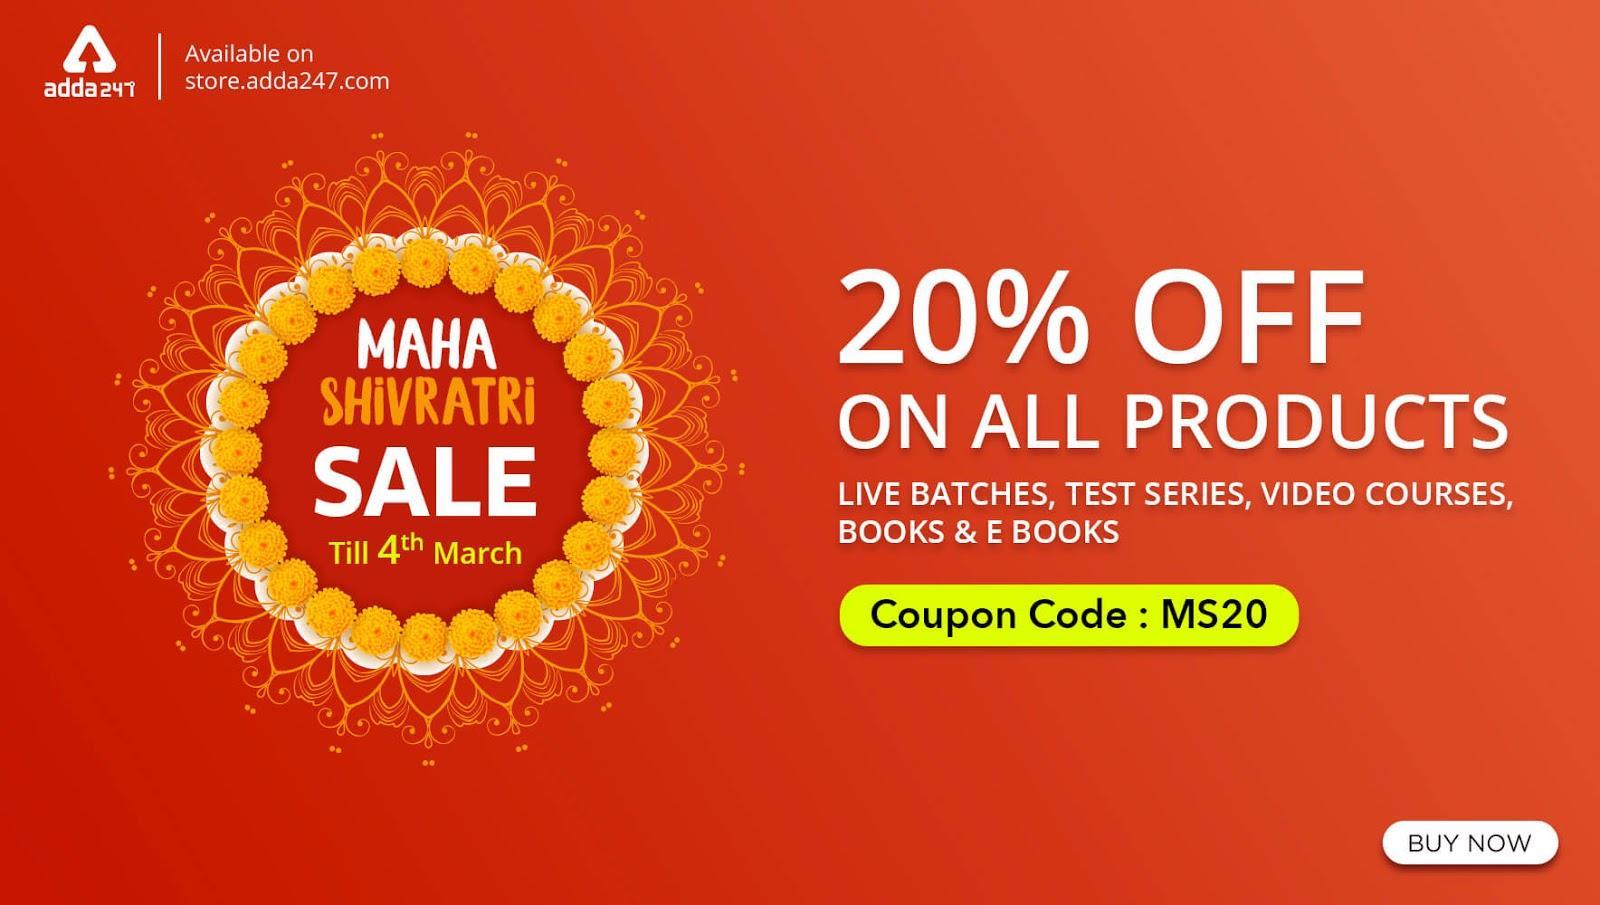 Last 6 Hours Left to Get Maha Shivratri Offer | Flat 20% Off on all Adda247 Test Series, Video Courses, Live Batches, Books & eBooks | Latest Hindi Banking jobs_3.1